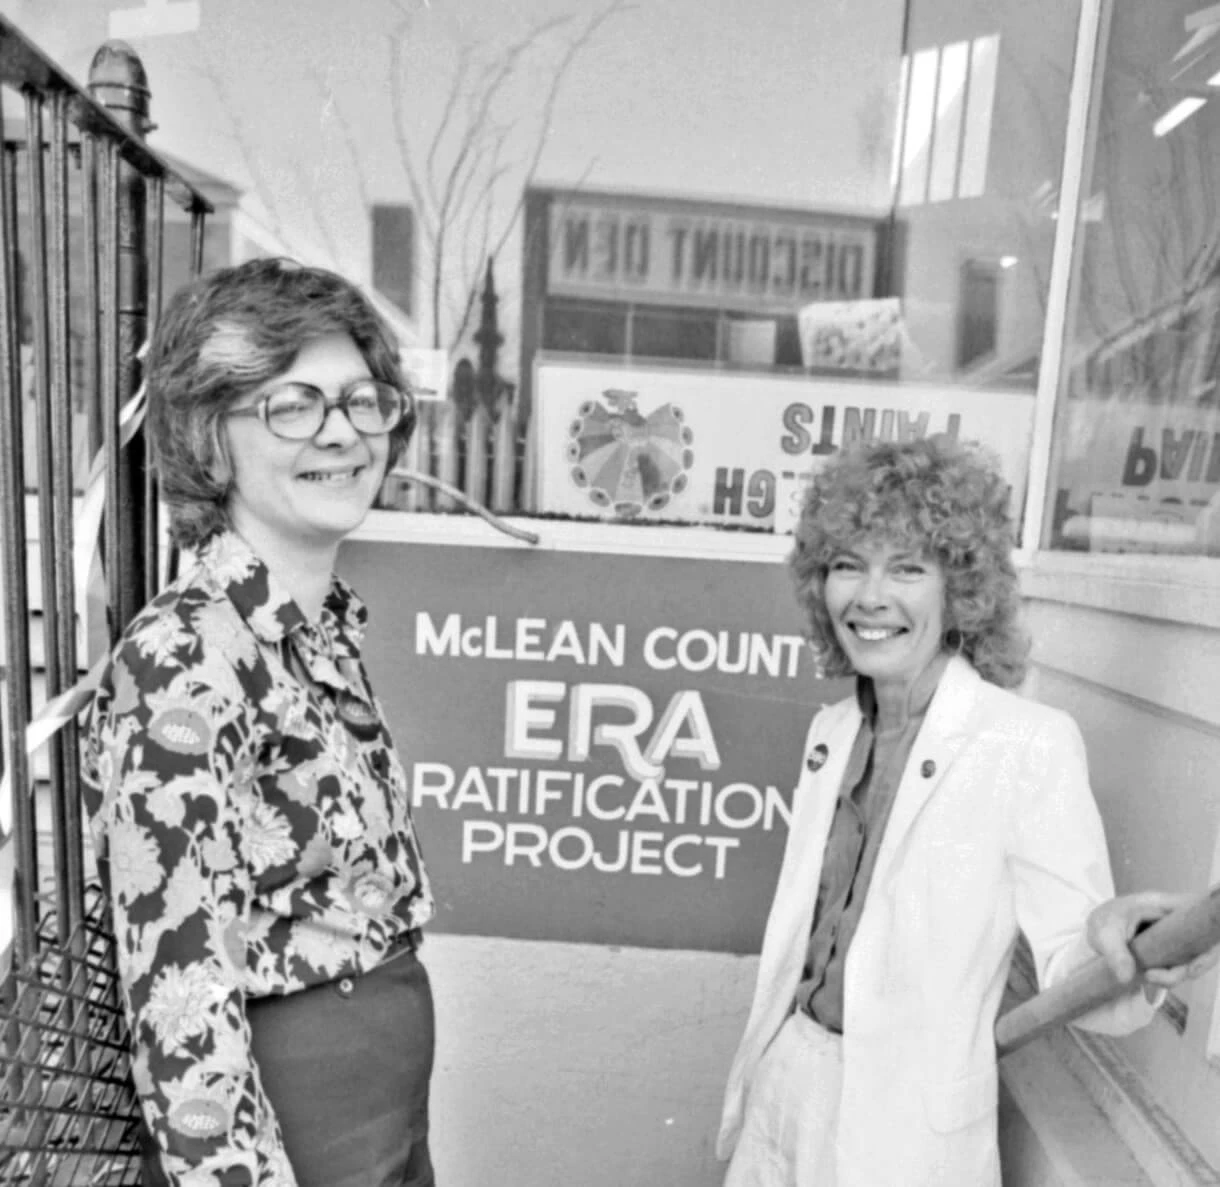 Two white women are standing at the top of a staircase with a sign behind them supporting the ERA amendment.